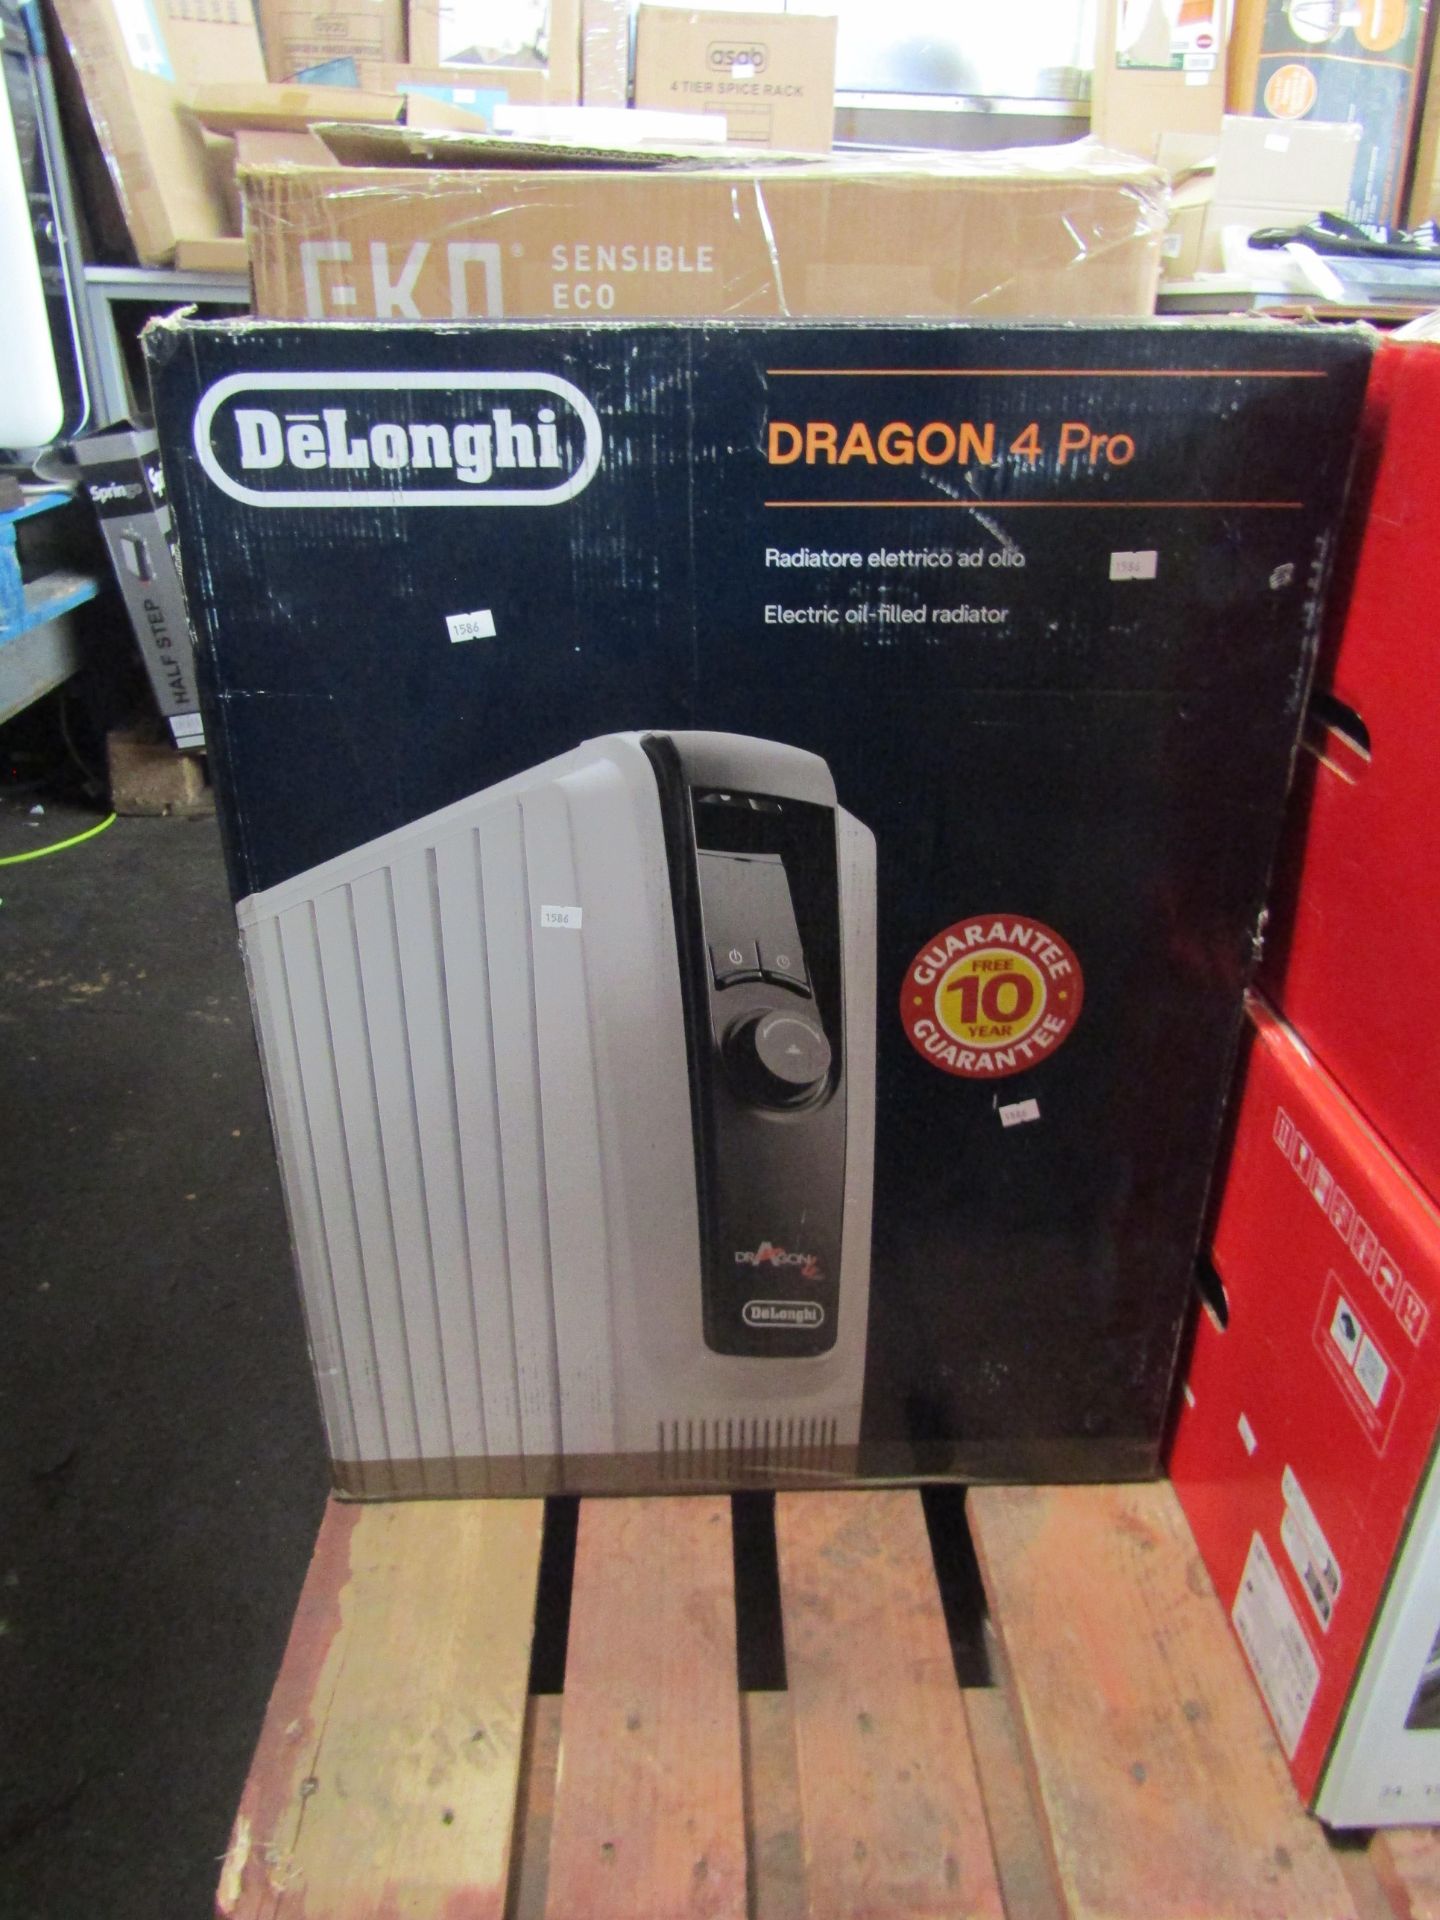 Delonghii Dragon 4 Pro Electric Oil Filled Radiator, Unchecked & Boxed.